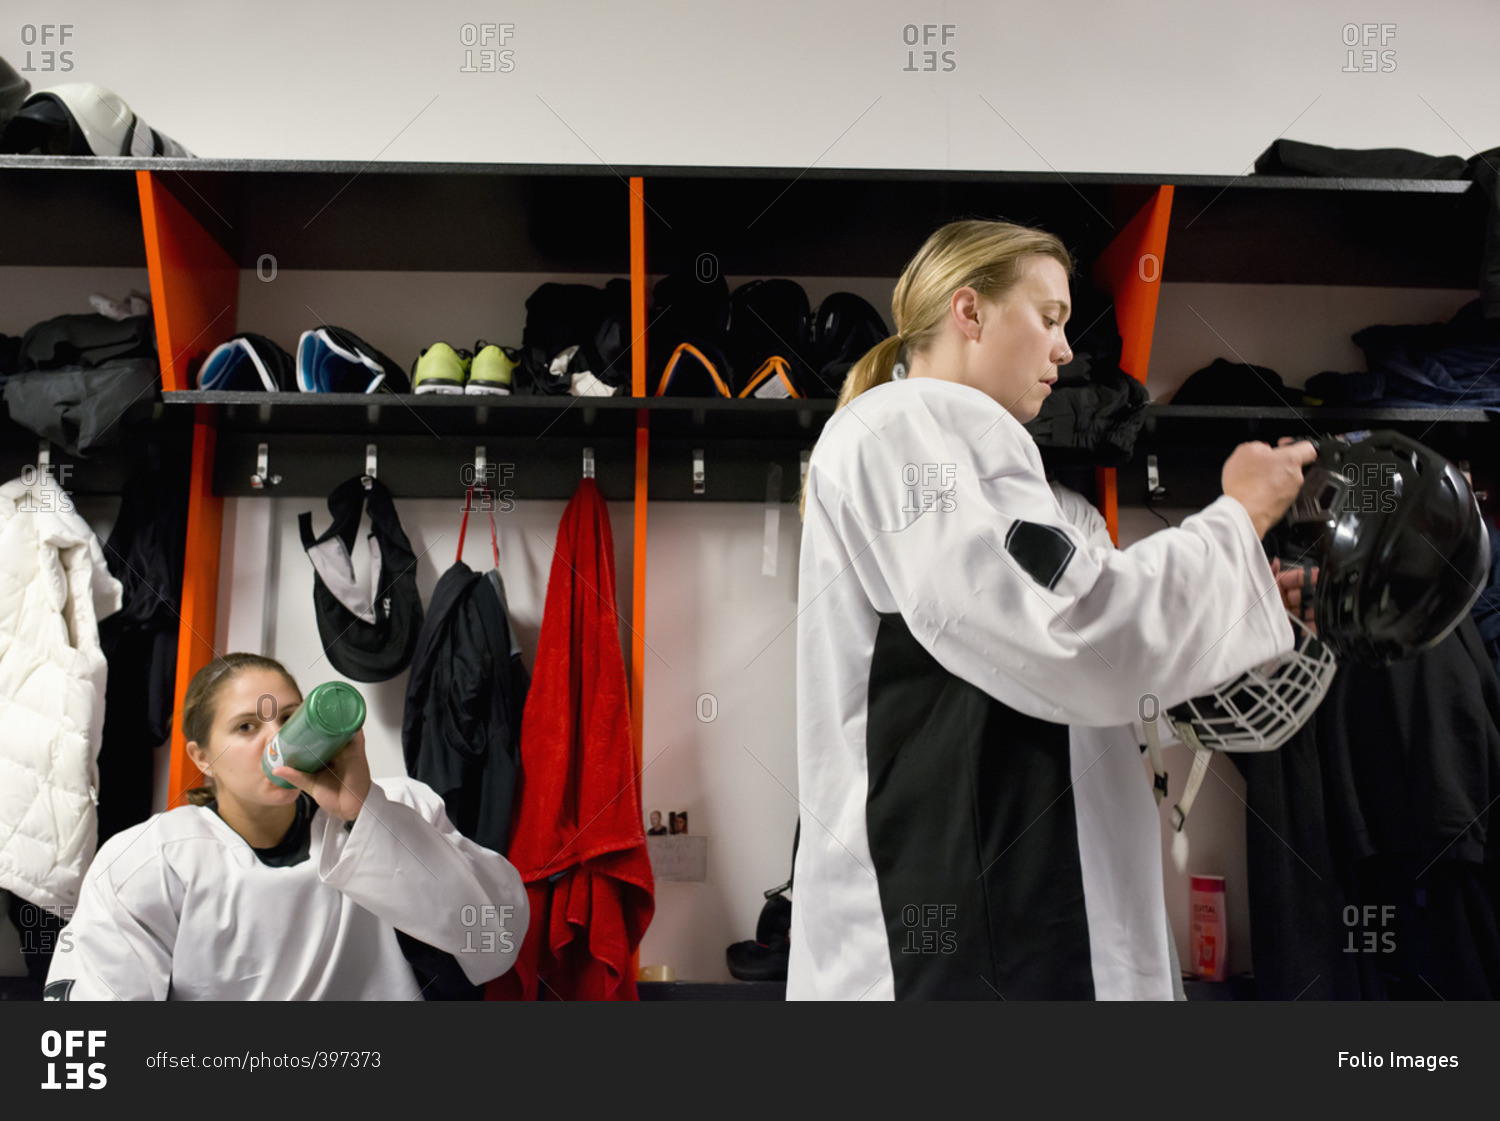 Sweden, Two young hockey players getting ready in locker room